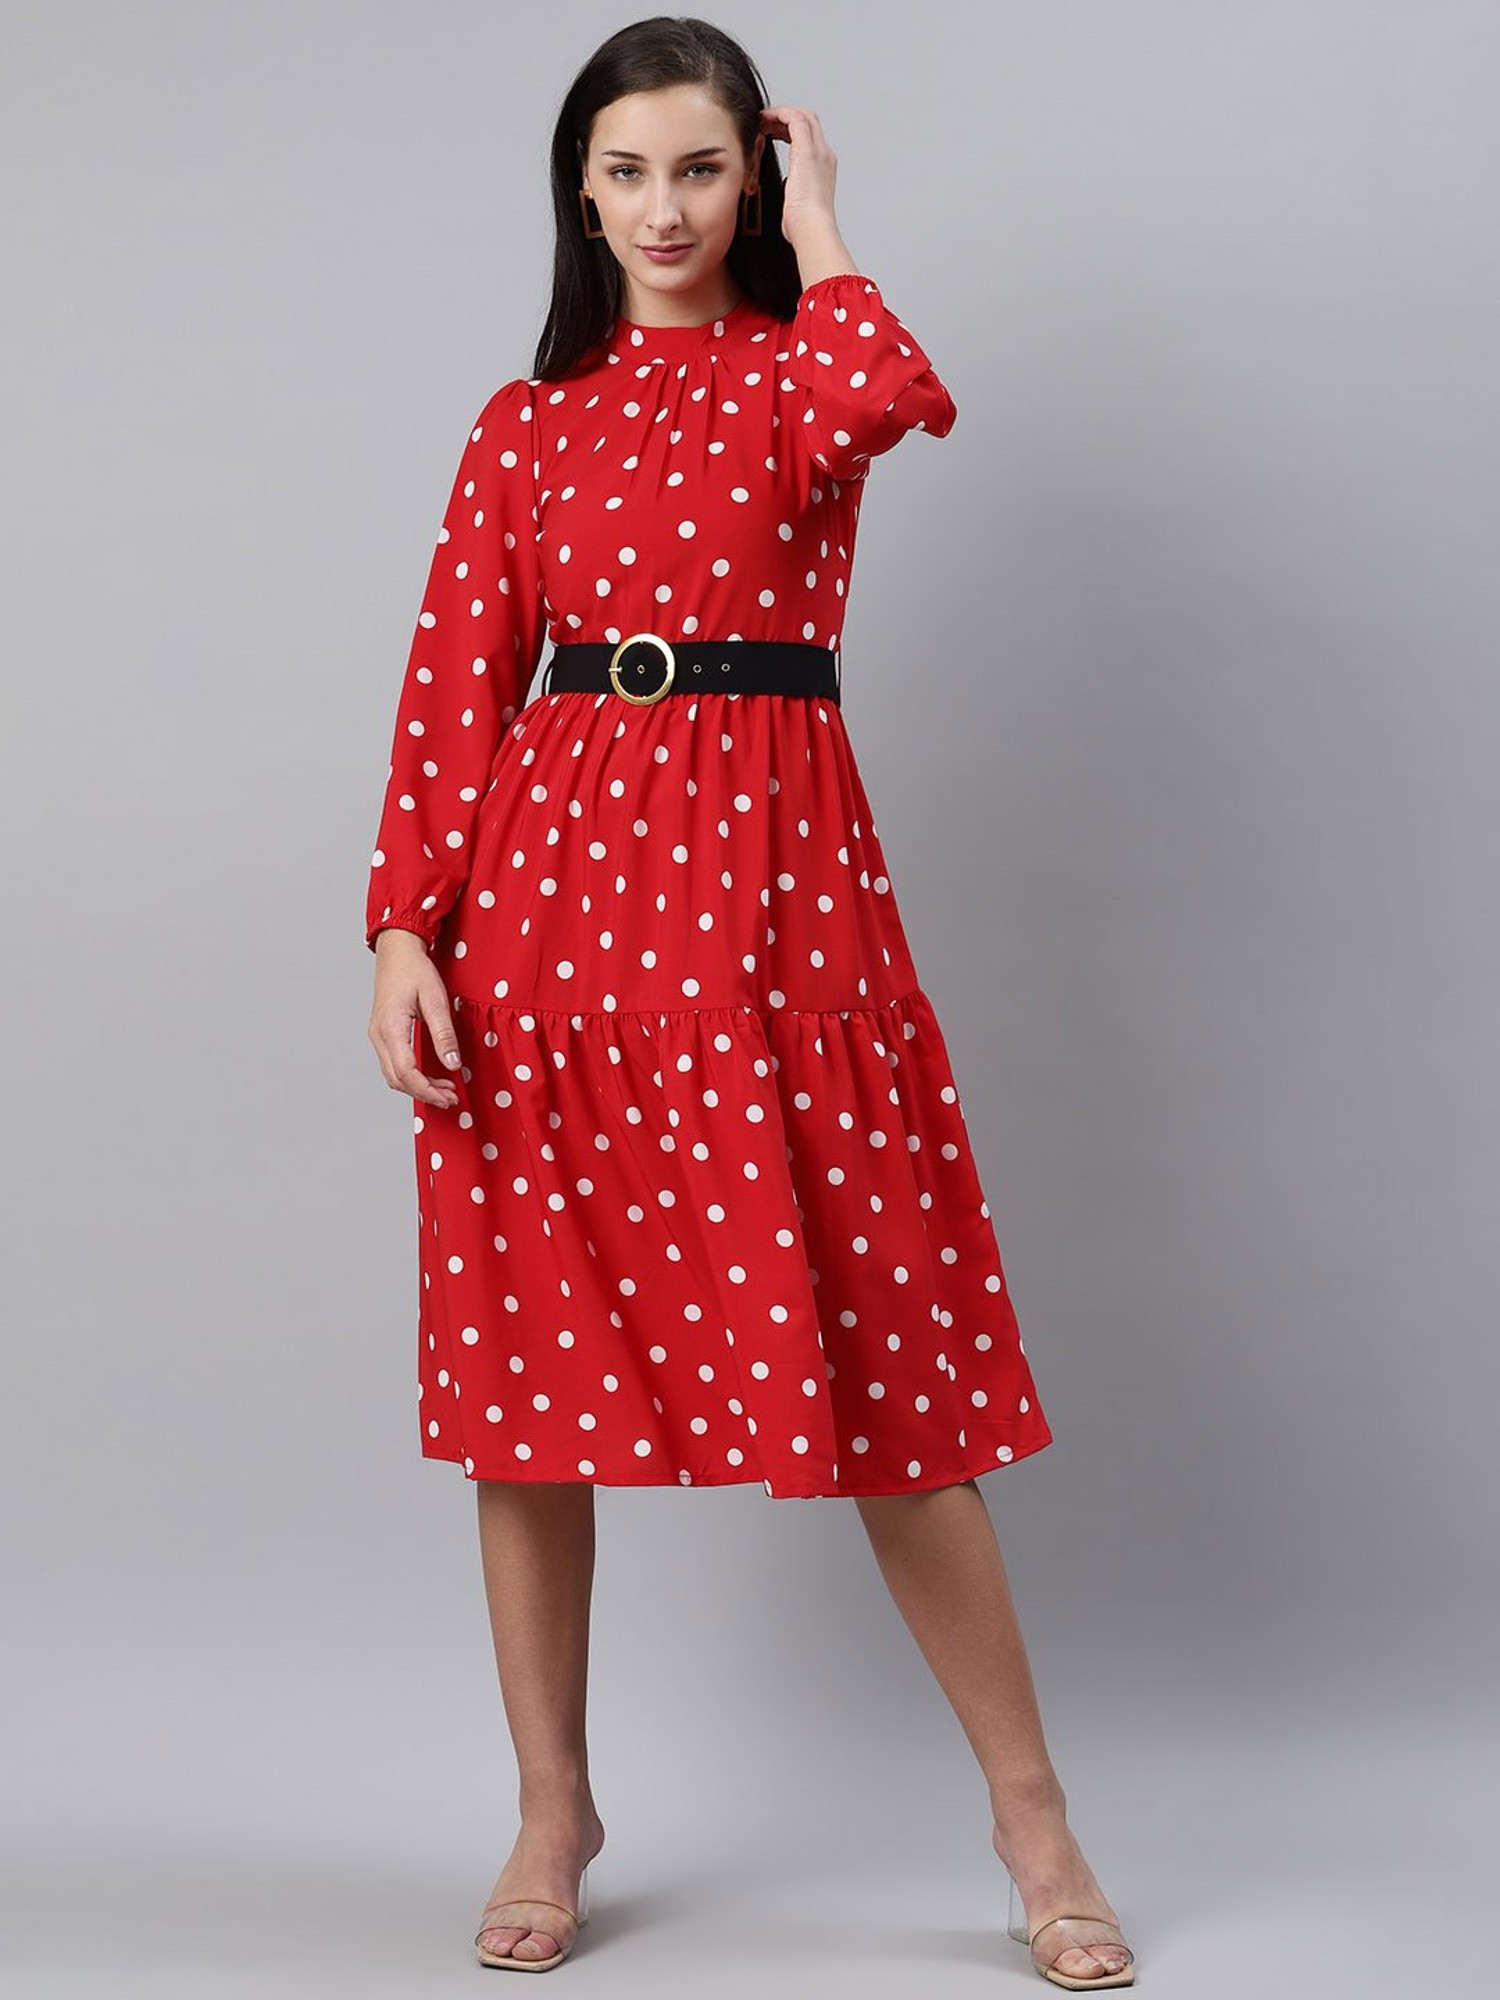 Holly Willoughby's & Other Stories polka-dot dress is back